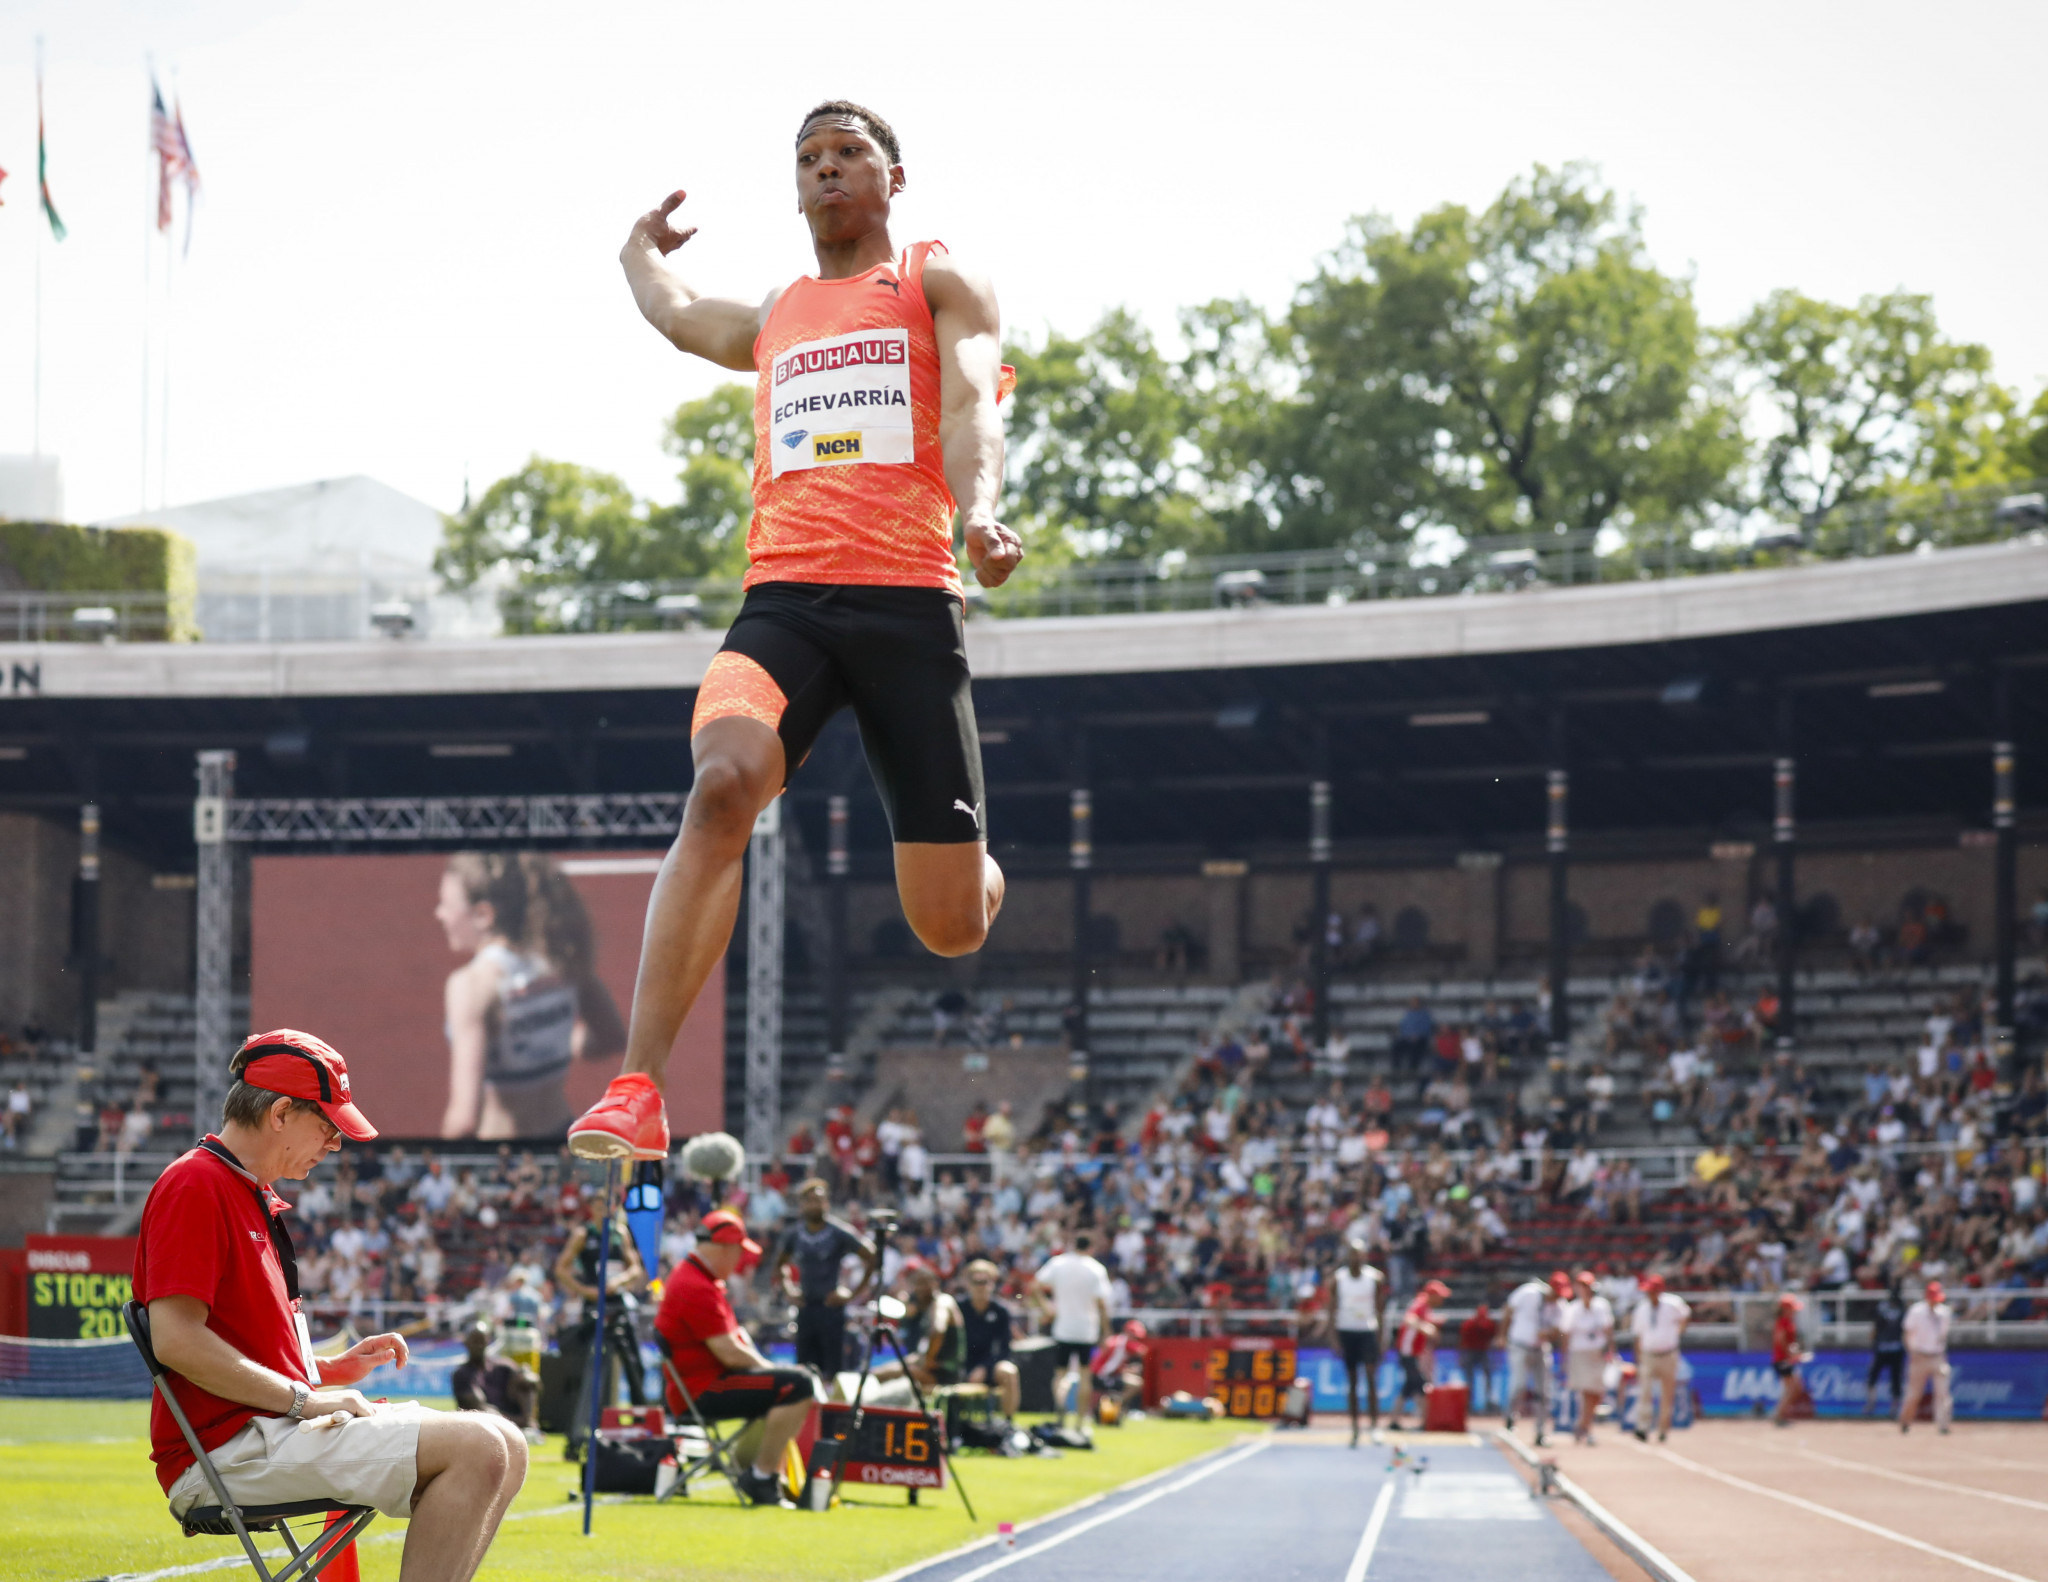 Juan Miguel Echevarria of Cuba produced an extraordinary long jump effort at last year's IAAF Diamond League meeting in Stockholm - and he's back again with records in mind ©Getty Images